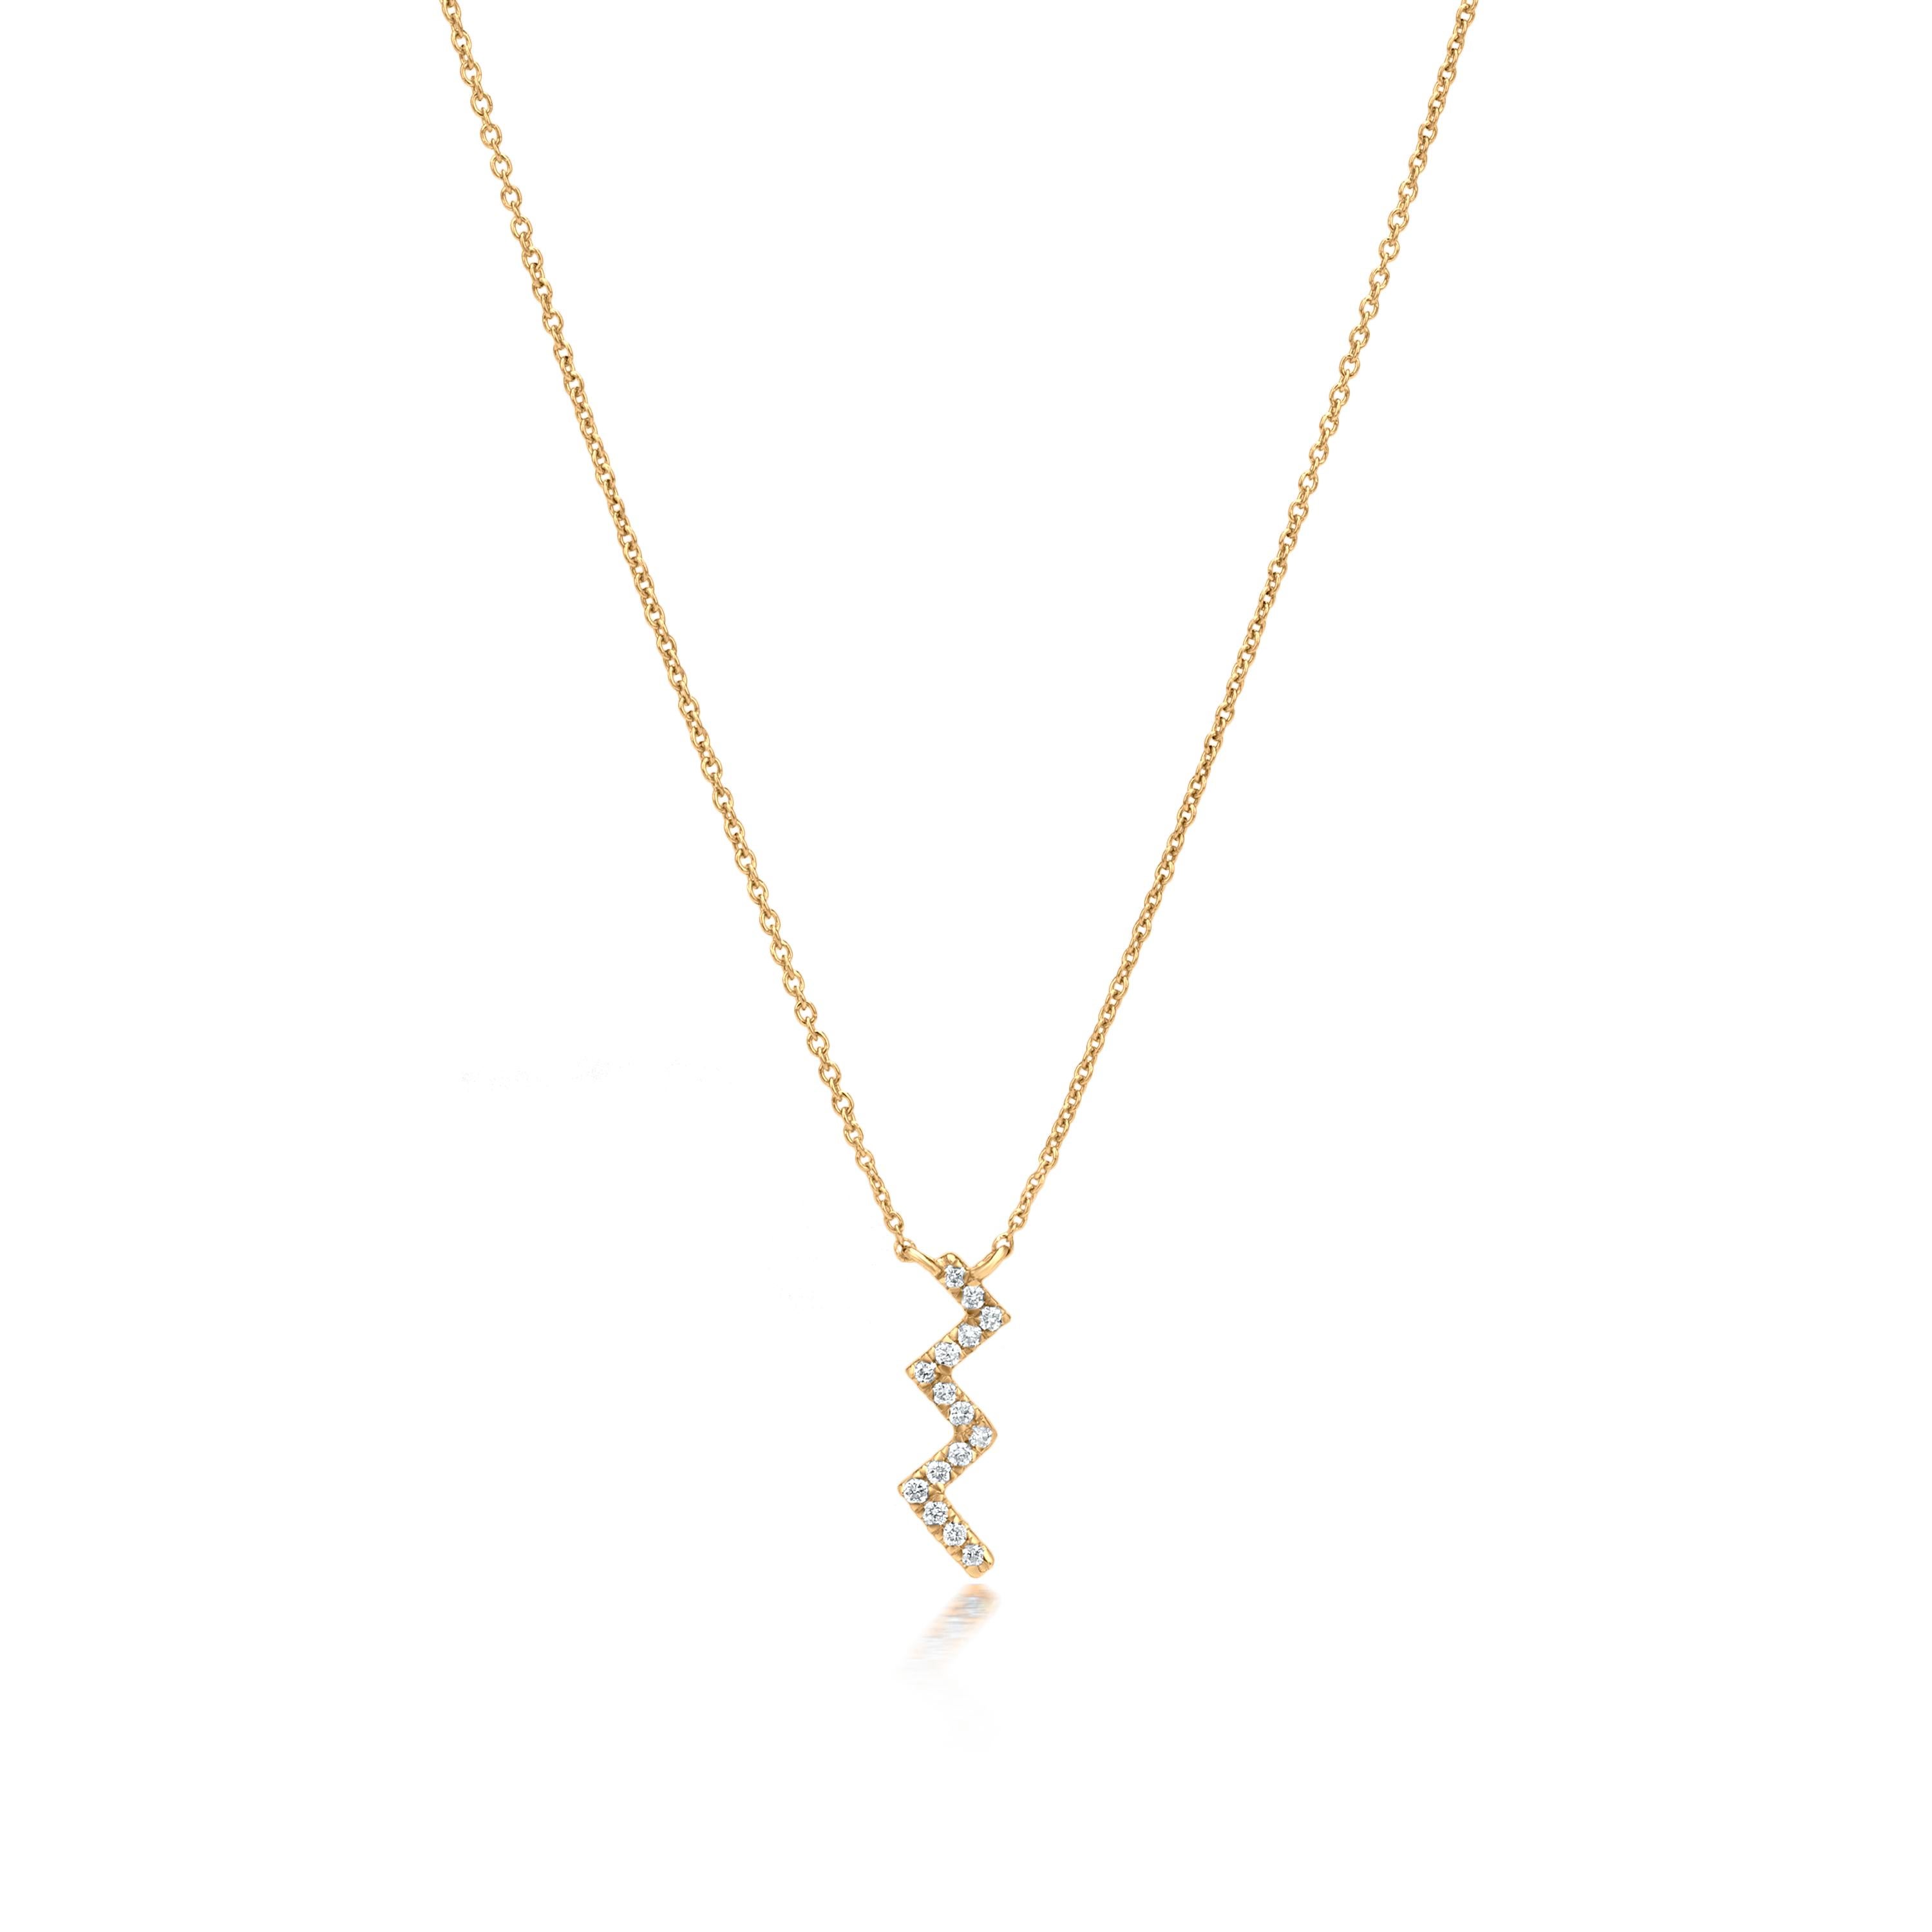 Grace your neckline with Luxle a zig-zag pendant it symbolizes rapid change. Subtle yet pretty this zig-zag pendant necklace is the new fashion statement. This gorgeous necklace is featured with 15 round cut diamonds, totaling 0.08Cts pave set in a